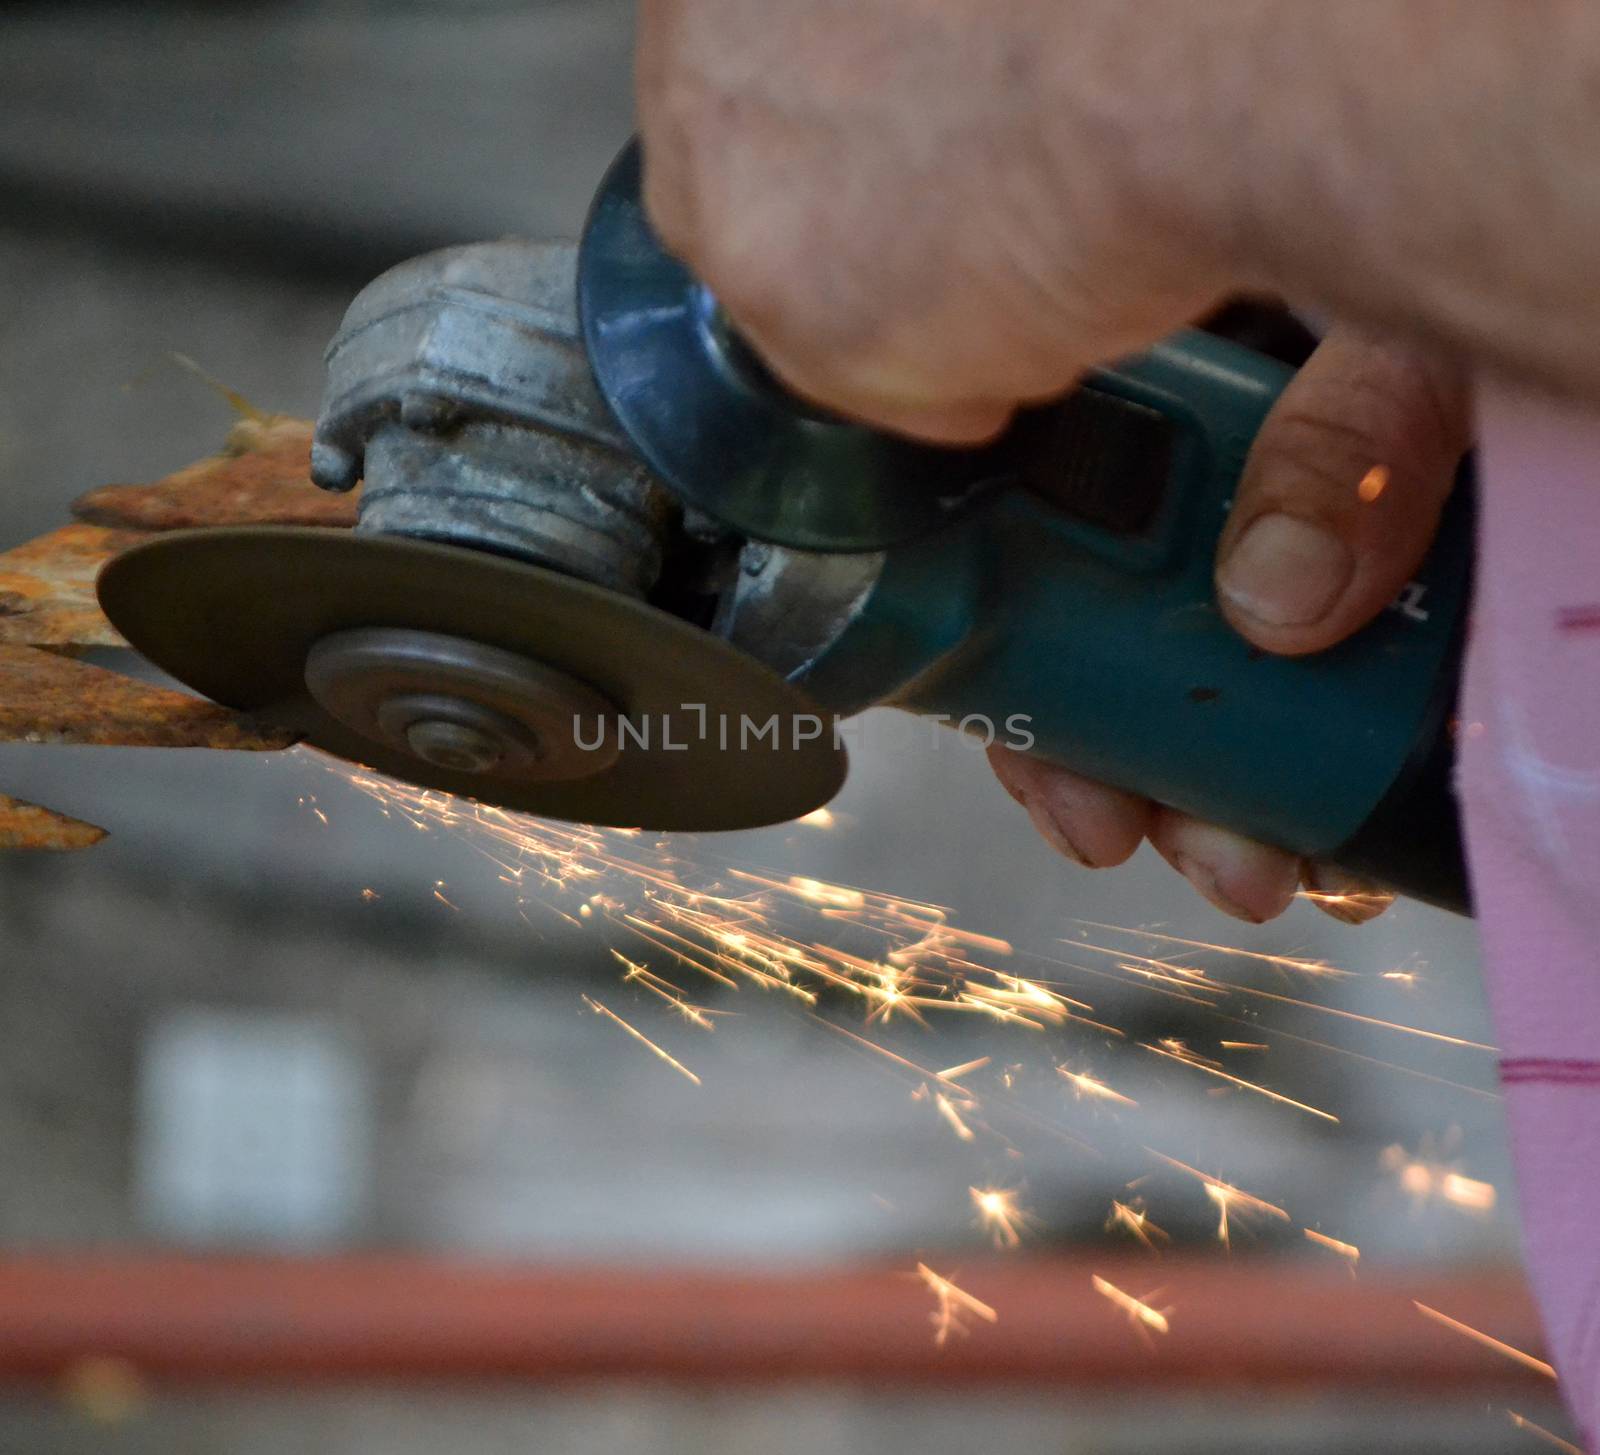 Man working with electric grinder tool on steel pipe and sparks flying